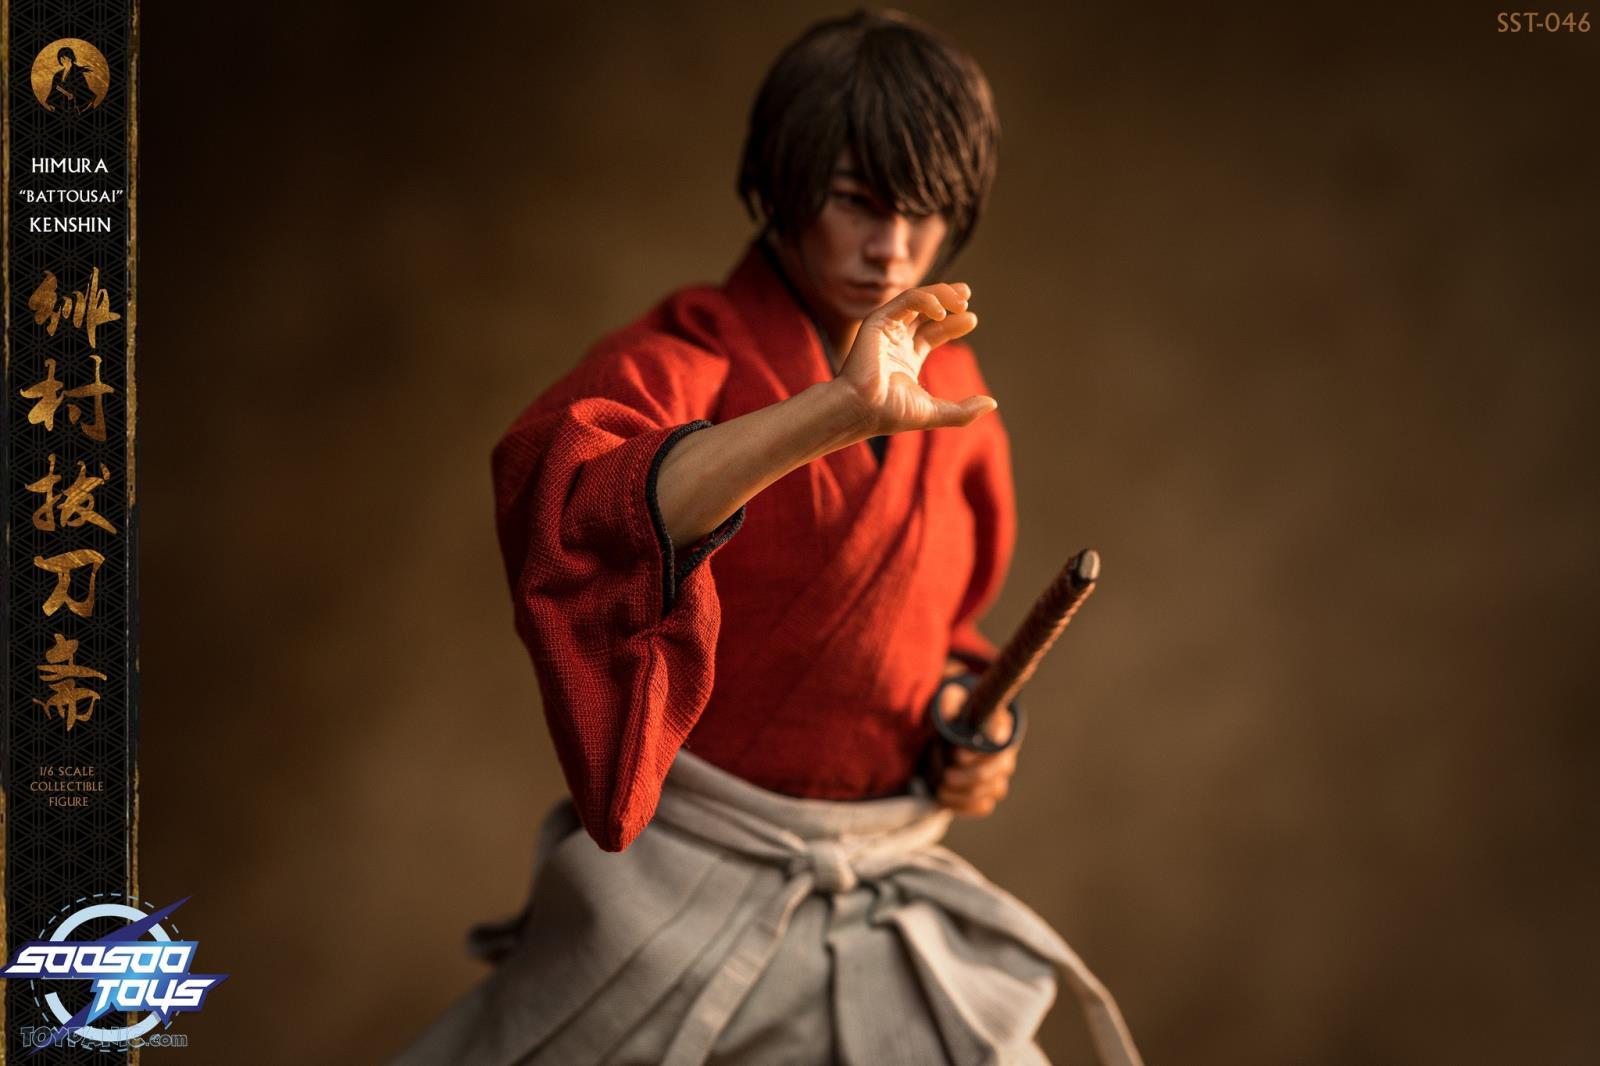 himura - NEW PRODUCT: 1/6 scale Rurouni Kenshin Collectible Figure from SooSooToys 712202251230PM_5762173